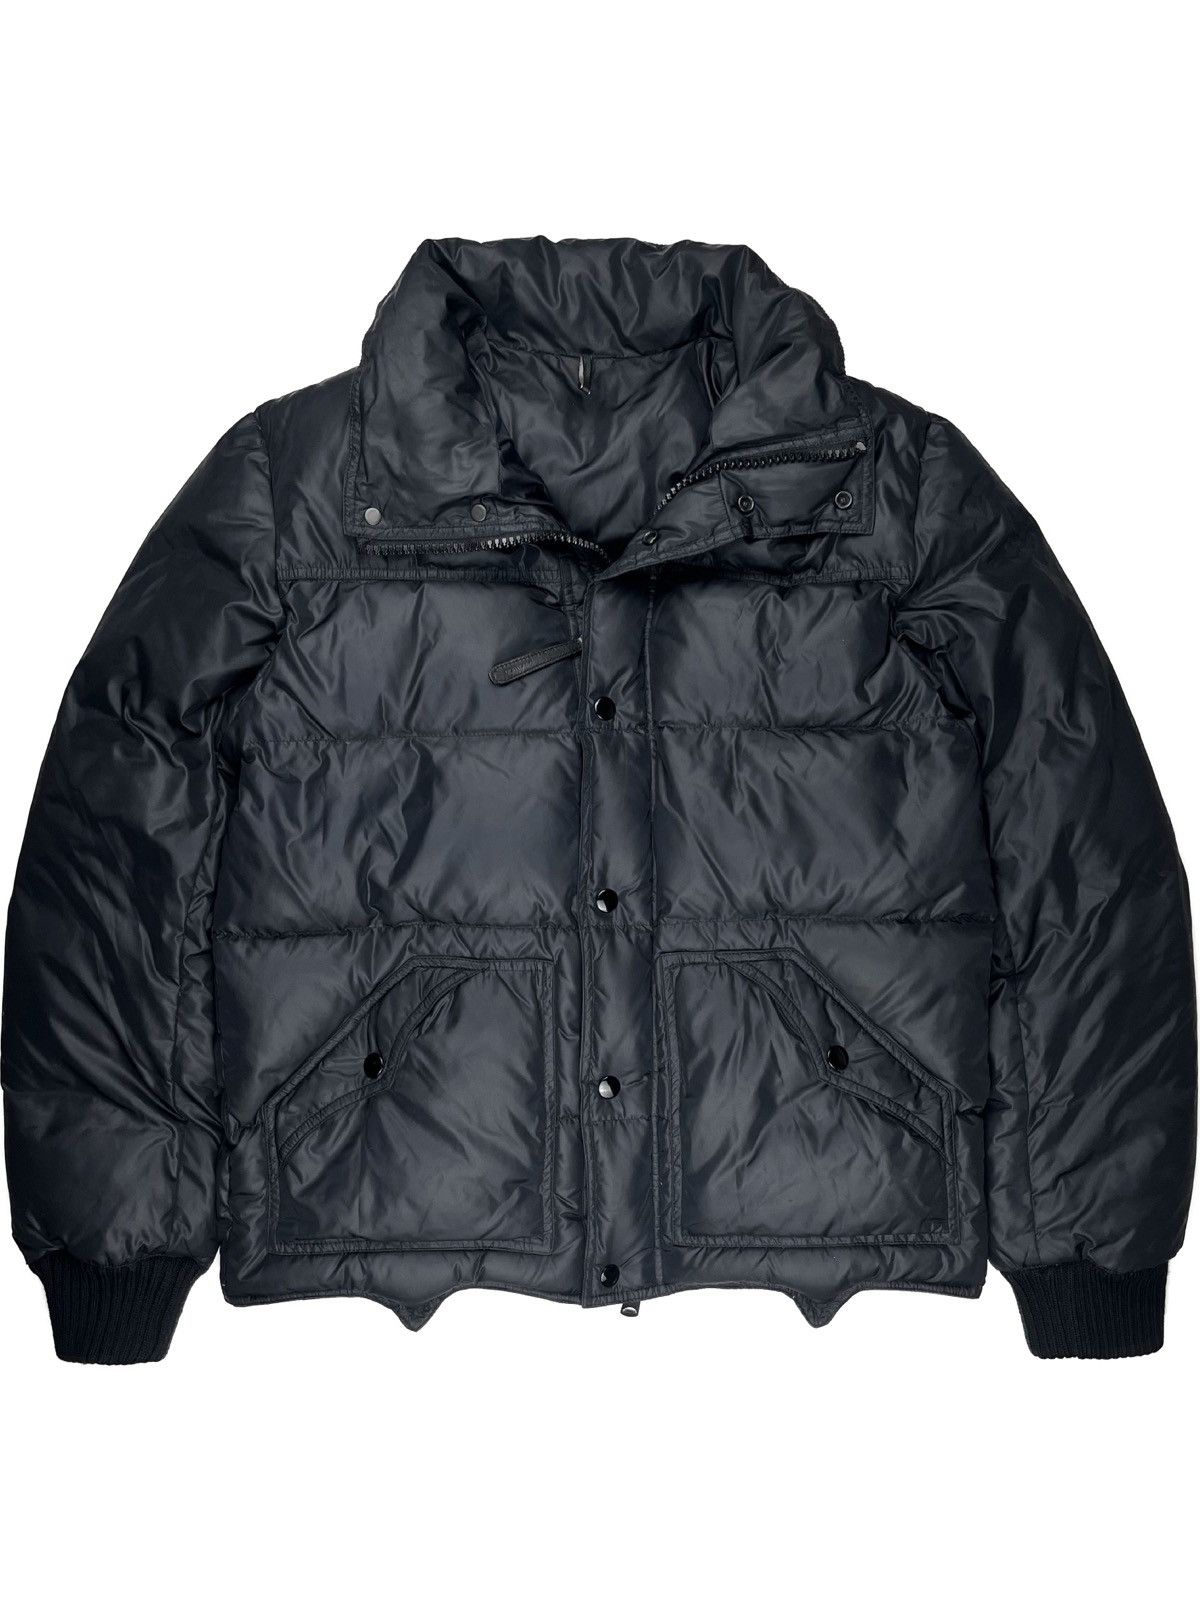 Dior AW06 Dior Homme Goose Down Puffer Jacket Black | Grailed